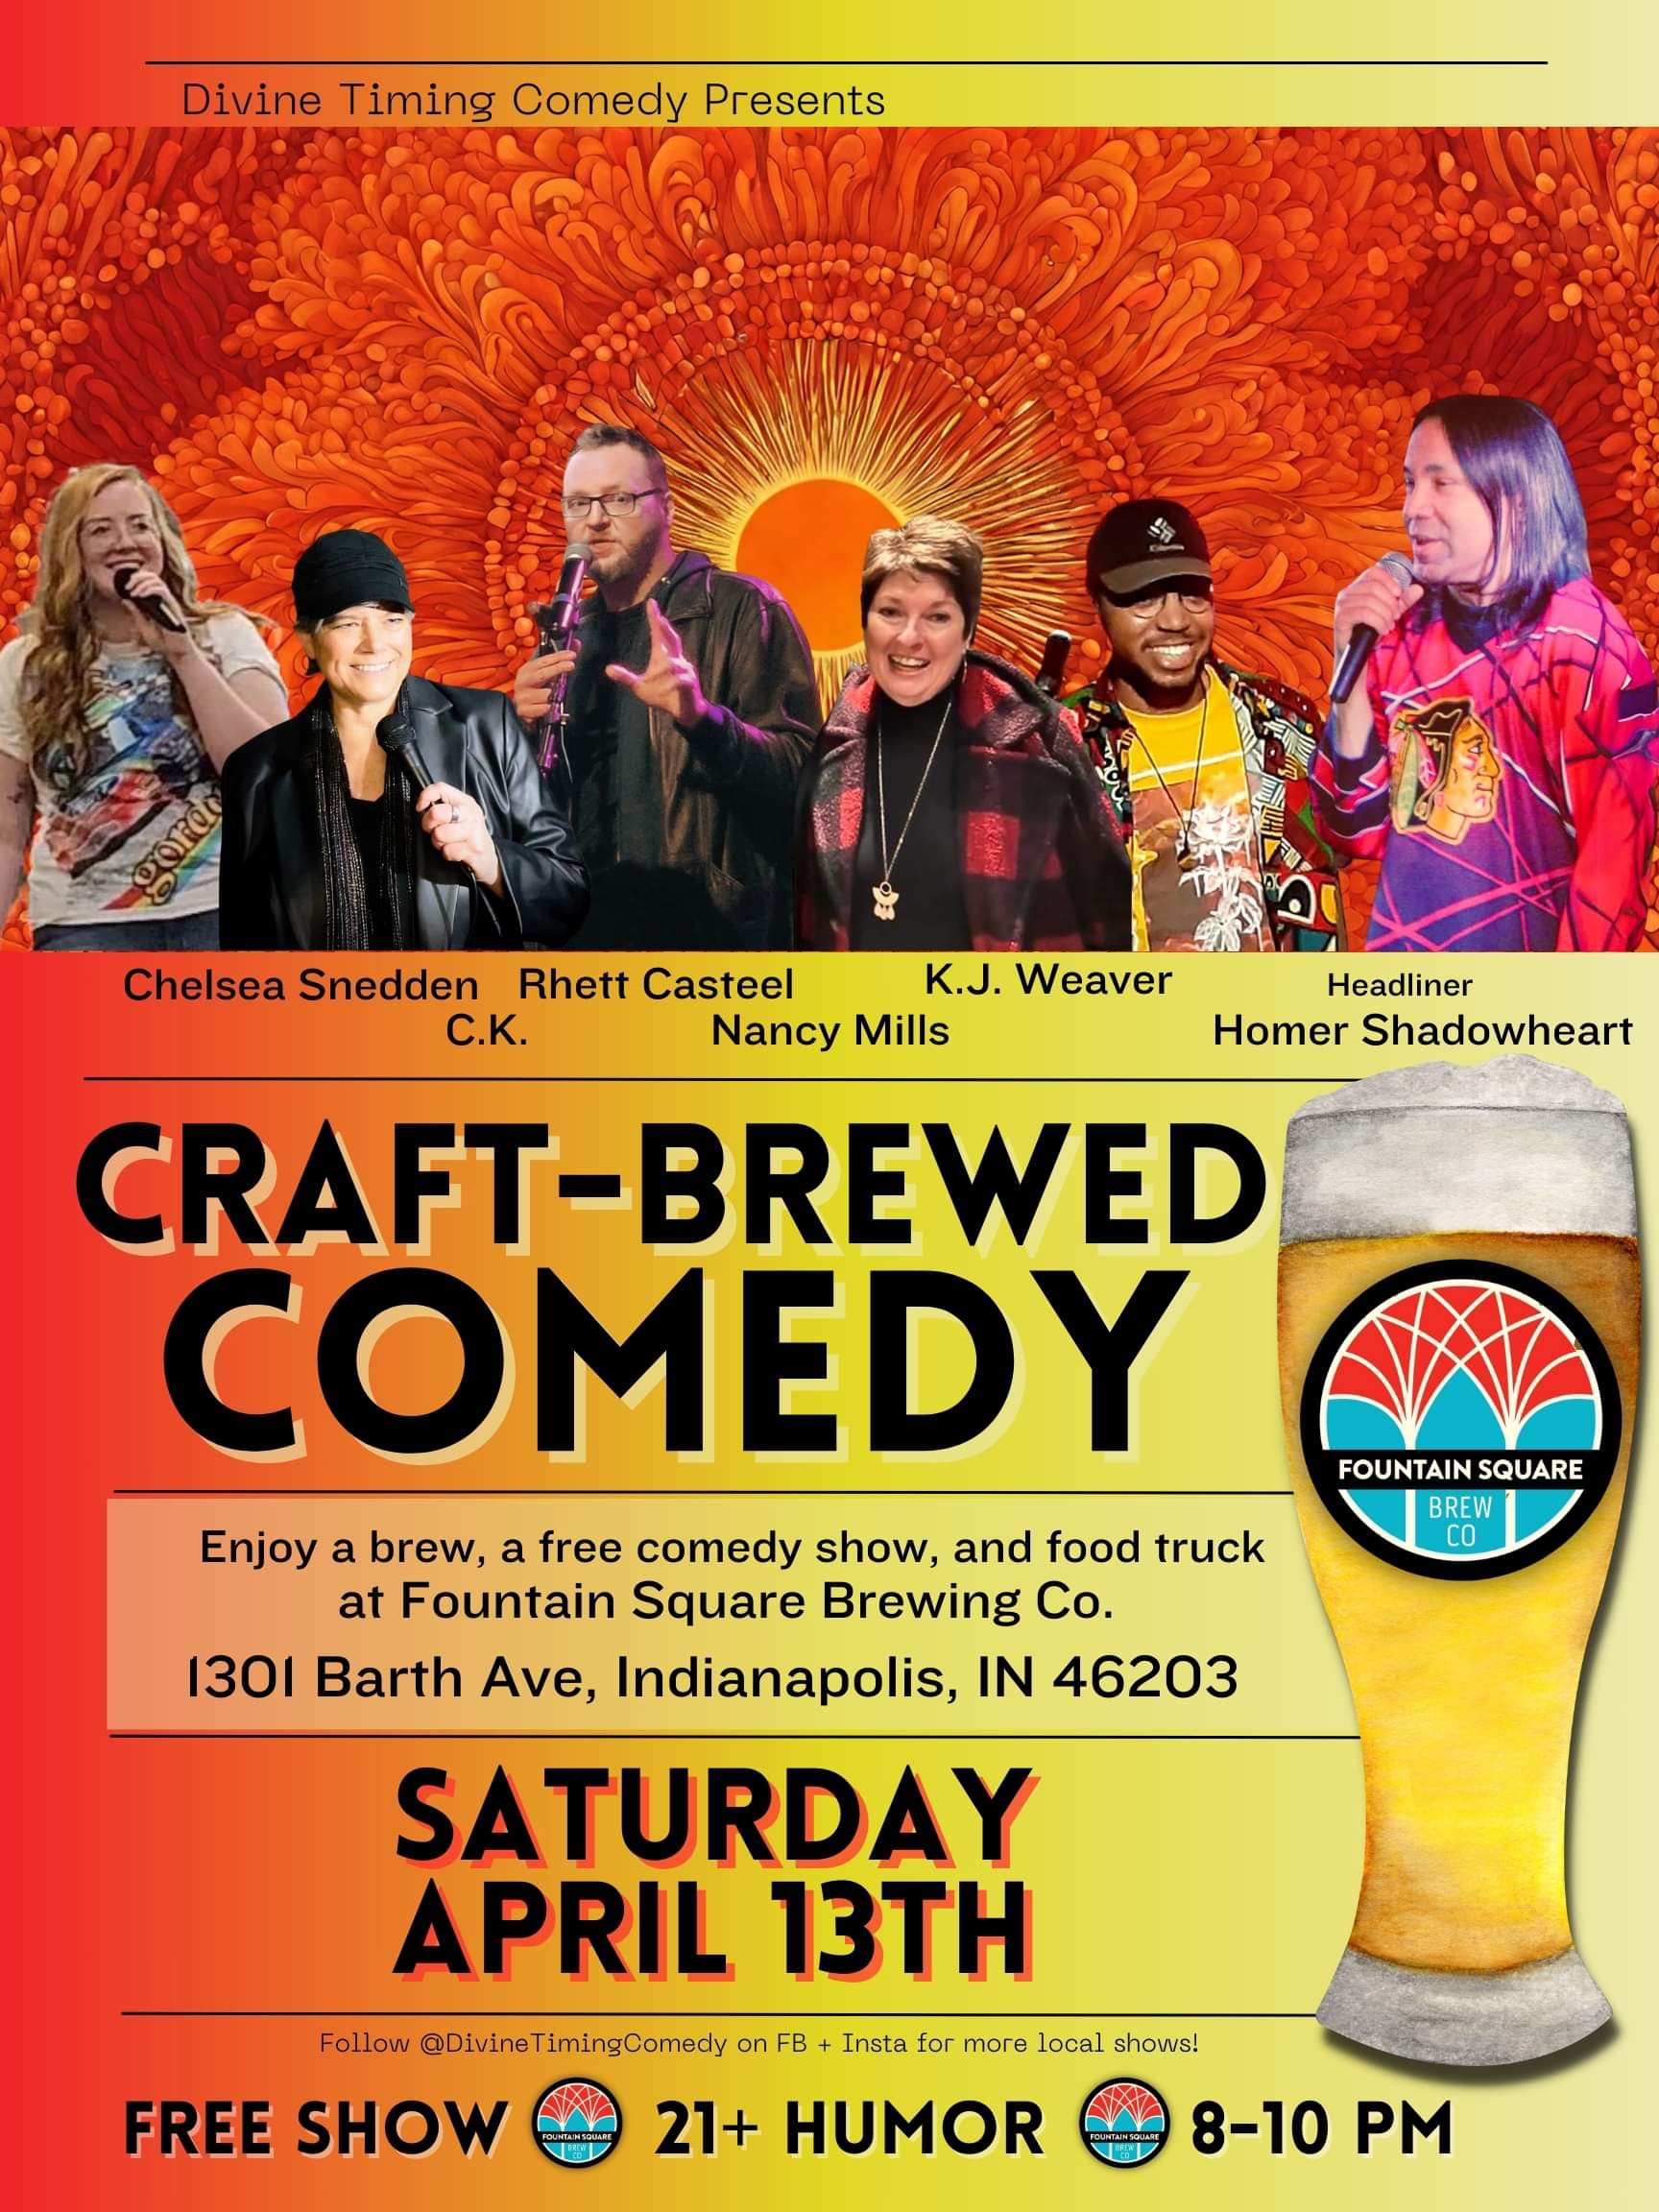 Divine Timing Comedy presents the craft brewed comedy showcase at Fountain Square Brewing on Saturday, April 13 at 8. This comedy show features six regional performers and is free to attend.